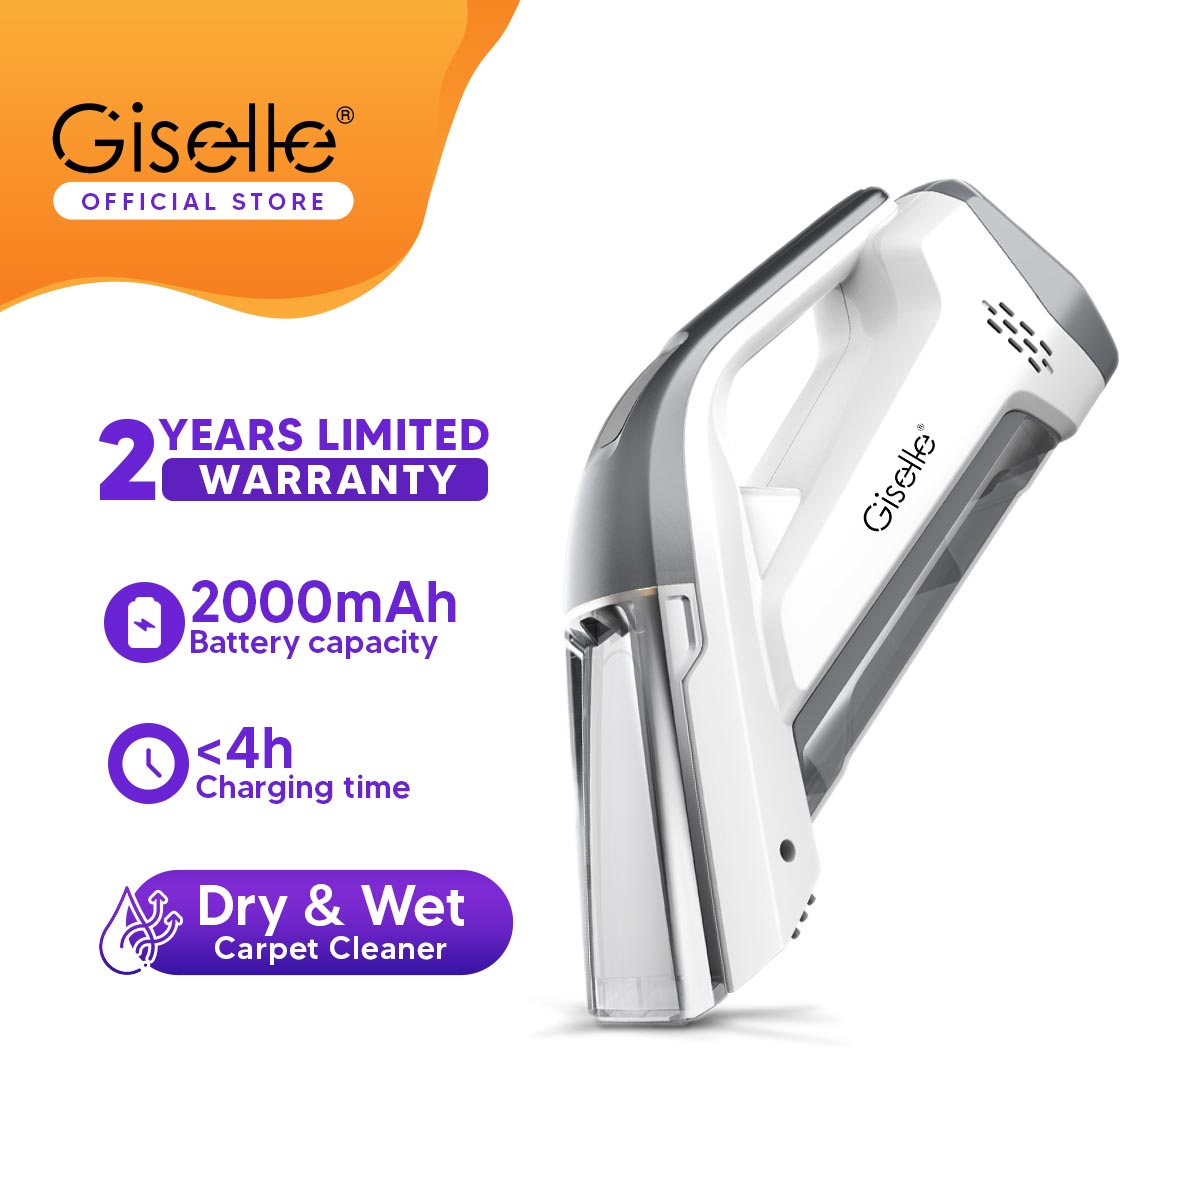 [New Arrived] Giselle Wireless Spot Cleaner For Fabric & Upholstery - KEA0362